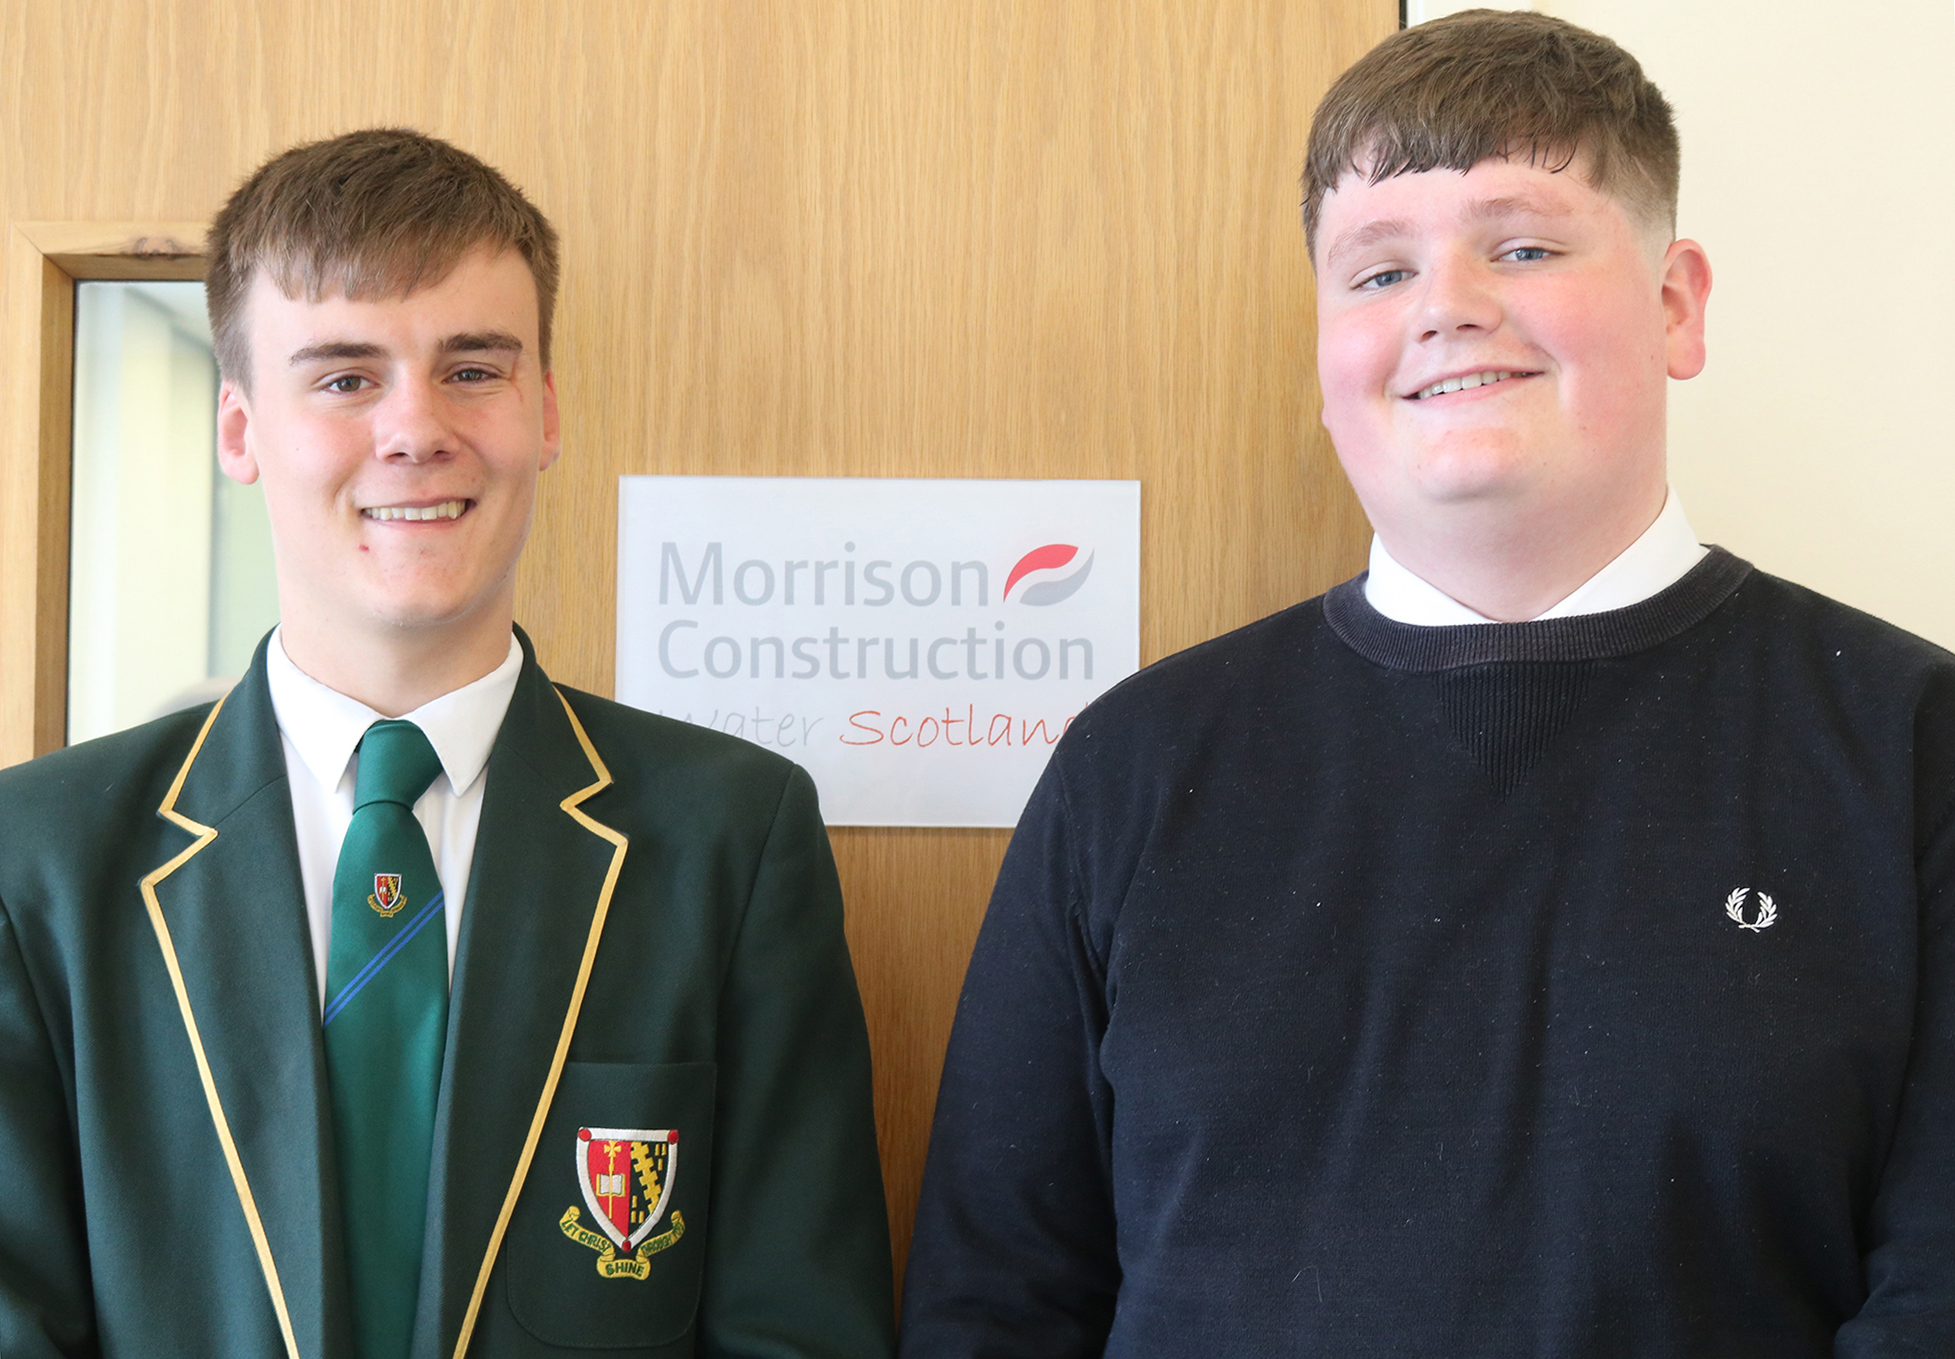 Senior students mentored by Morrison Construction to be ‘career ready’